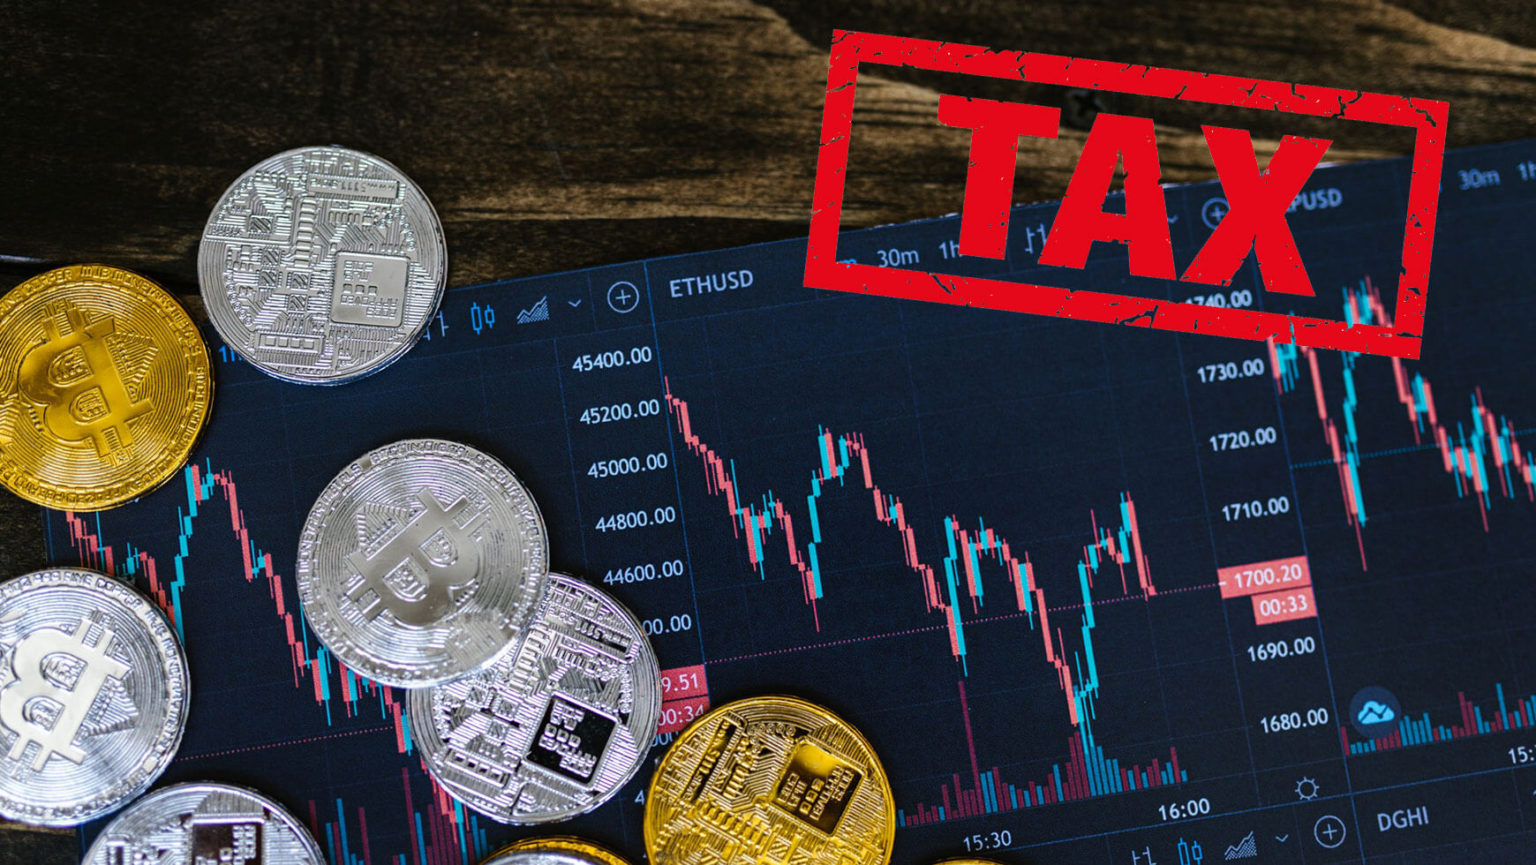 crypto tax laws 2021